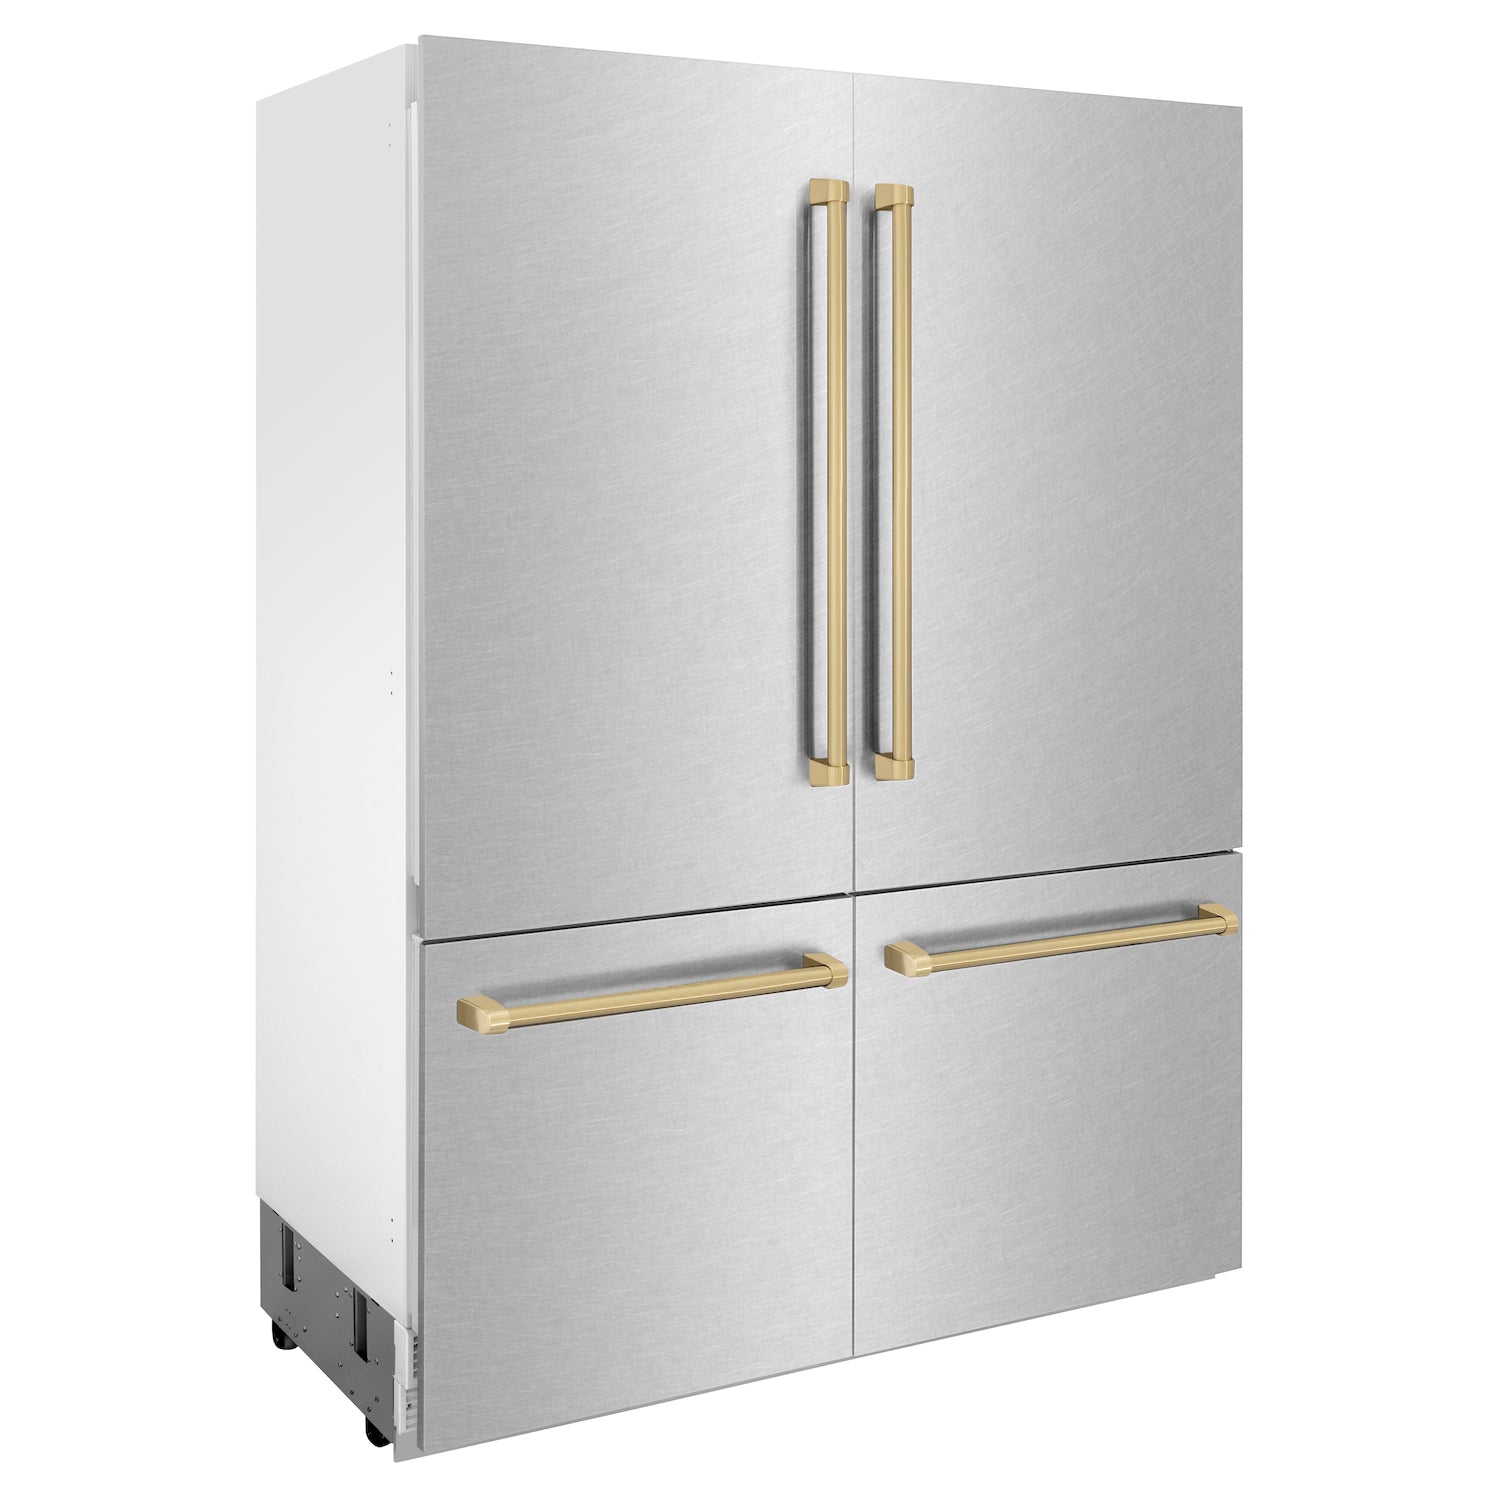 ZLINE Autograph Edition 60 in. 32.2 cu. ft. Built-in 4-Door French Door Refrigerator with Internal Water and Ice Dispenser in Fingerprint Resistant Stainless Steel with Champagne Bronze Accents (RBIVZ-SN-60-CB) side, closed.